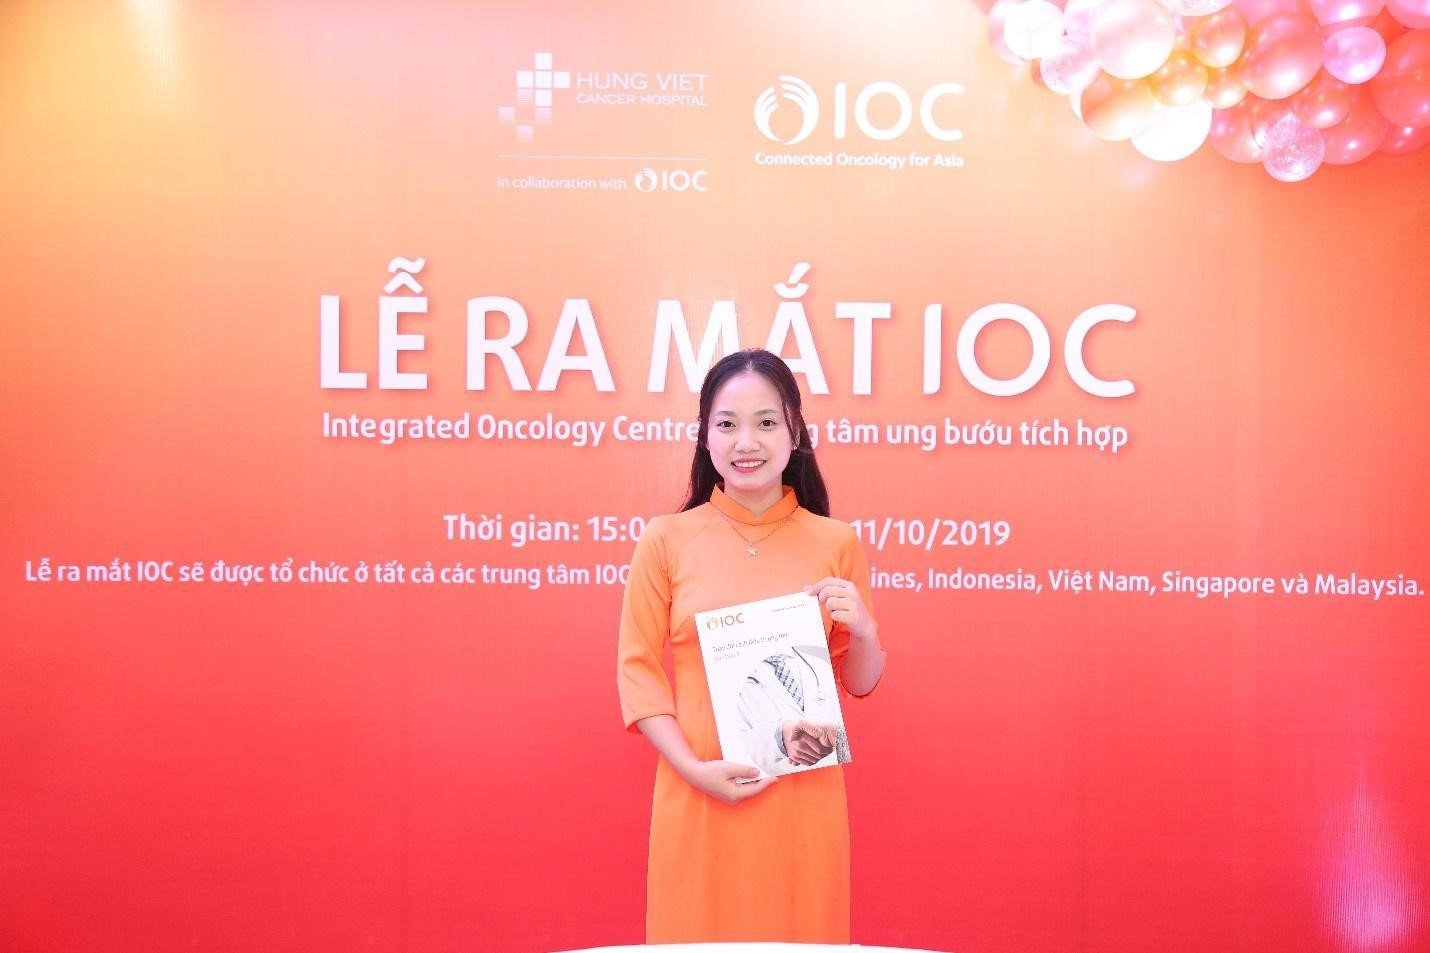 Reaching more patients in Vietnam with quality cancer care